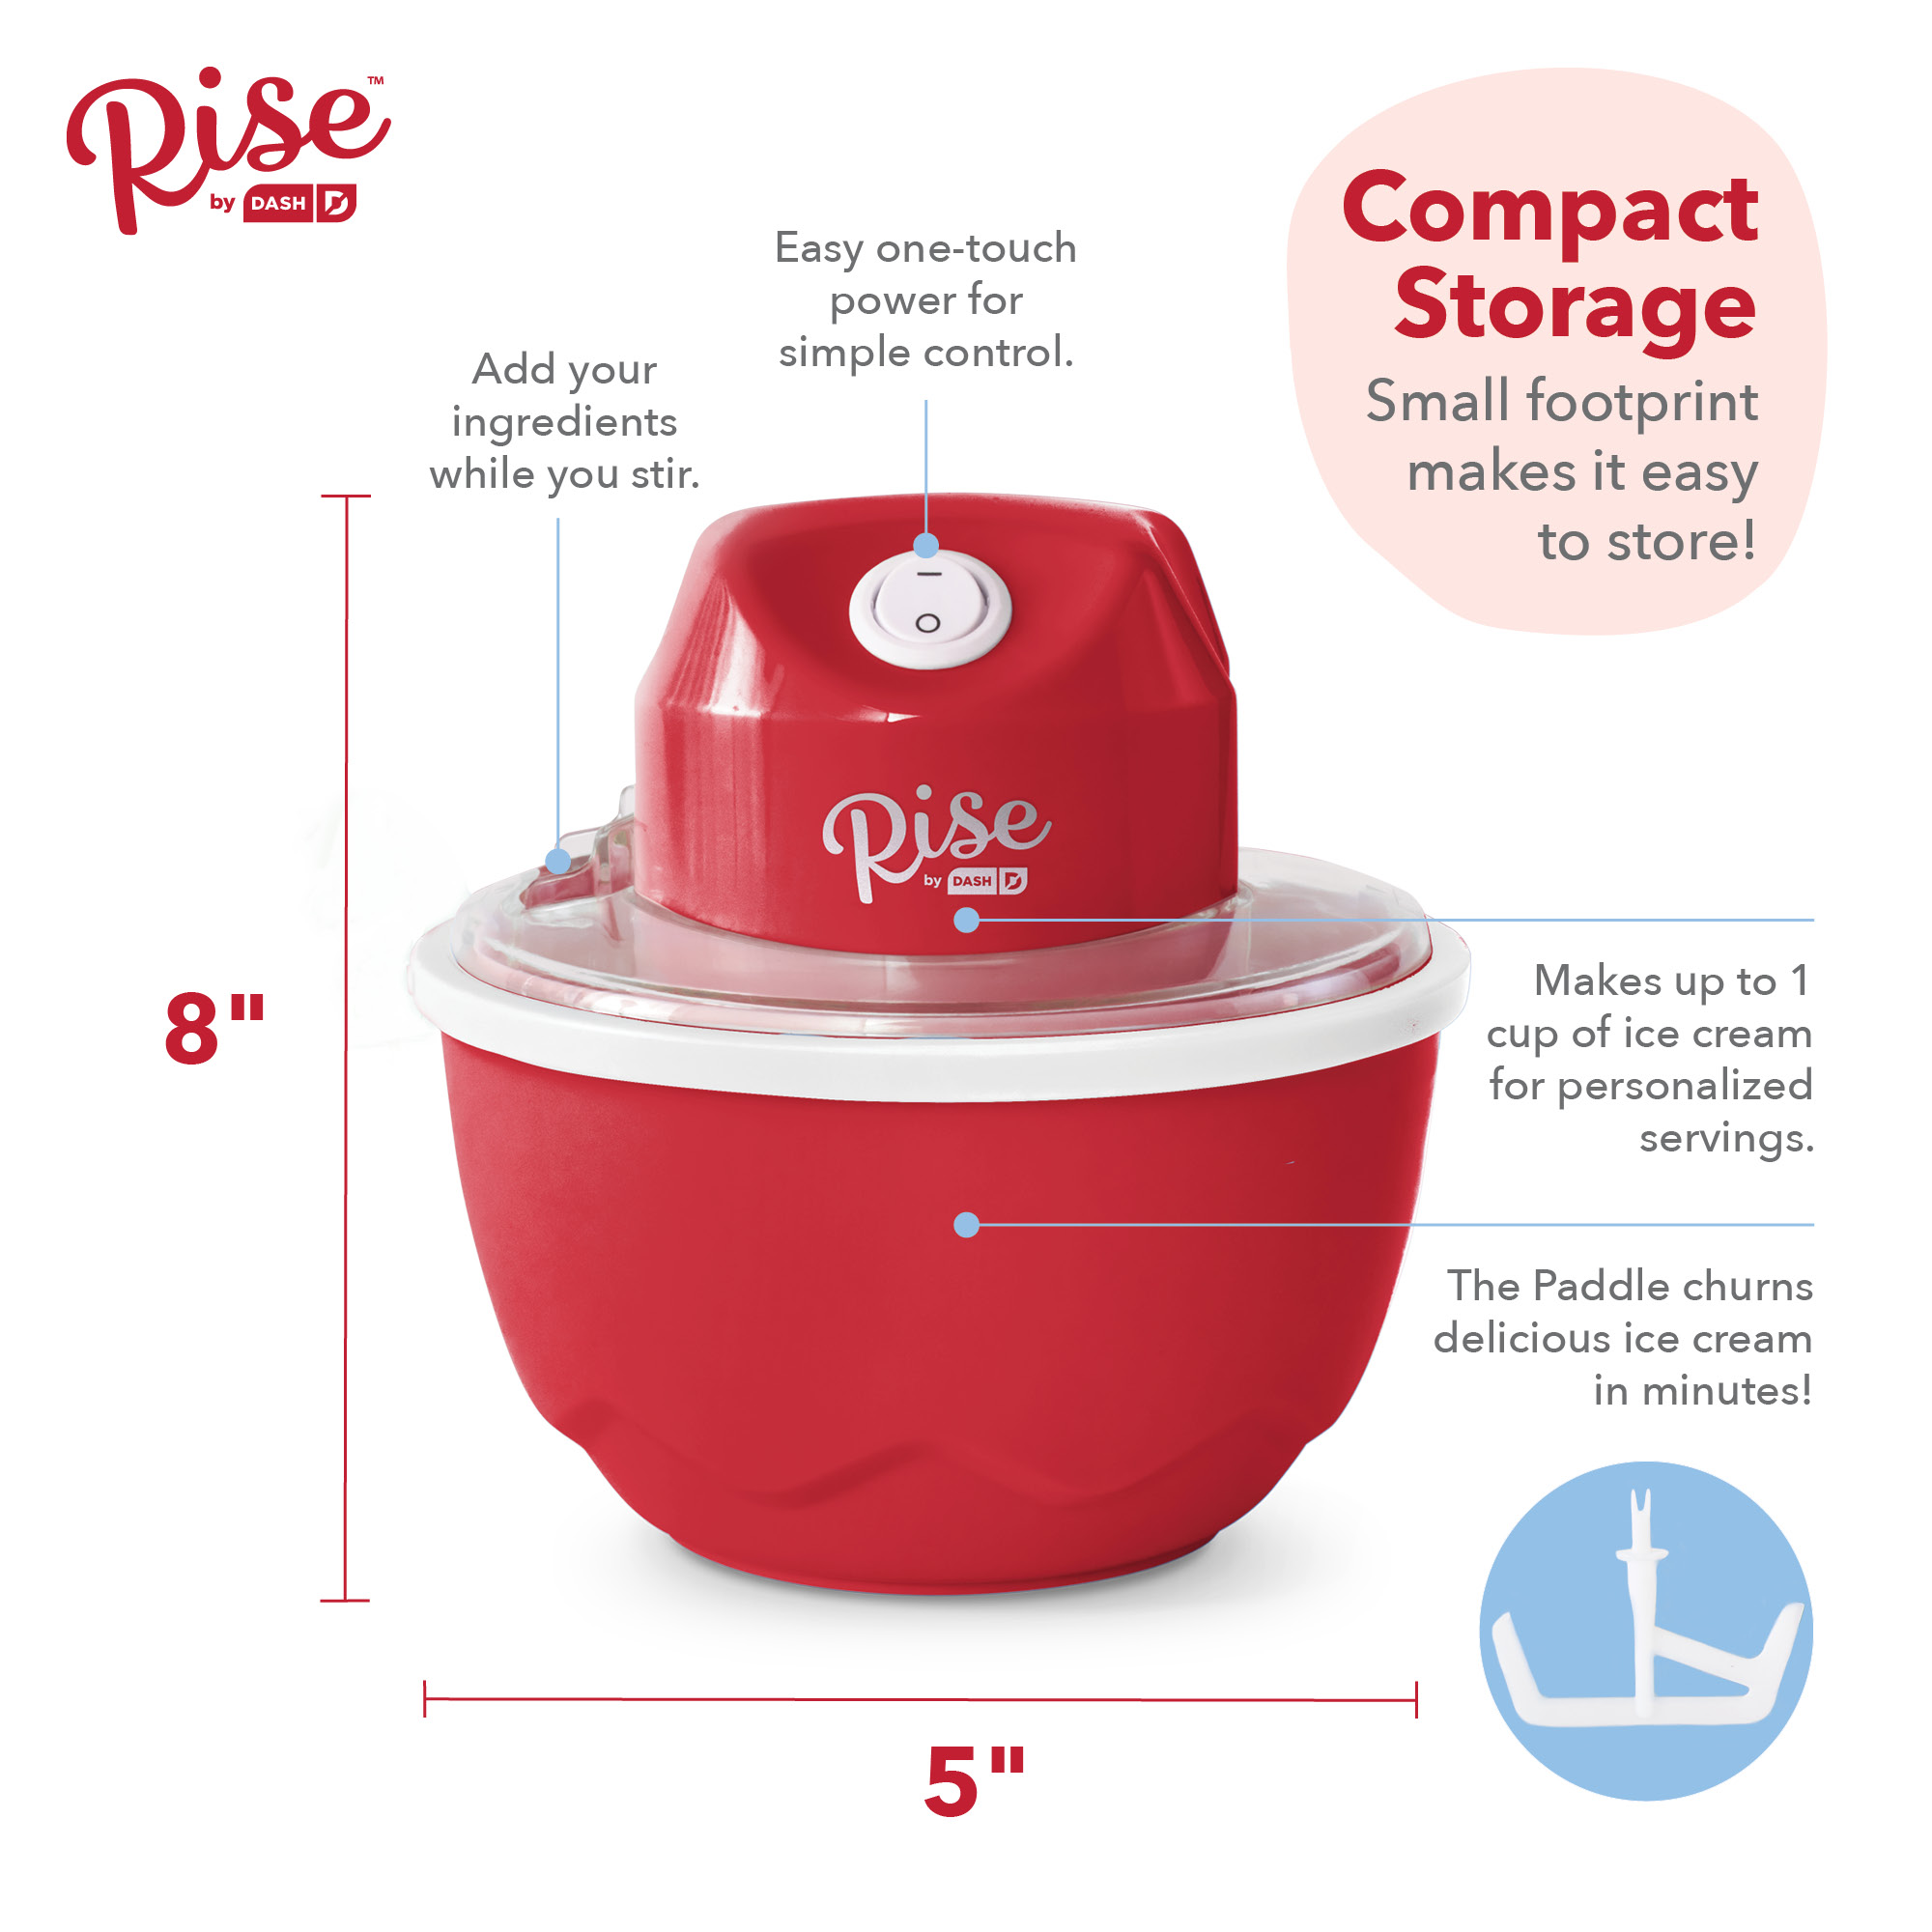 Rise by Dash Personal Electric Ice Cream Maker for Gelato, Sorbet + Frozen Yogurt (Healthy Snacks + Dessert for Kids & Adults) - 1 Pint - Red - 2.6 lb. - image 3 of 7